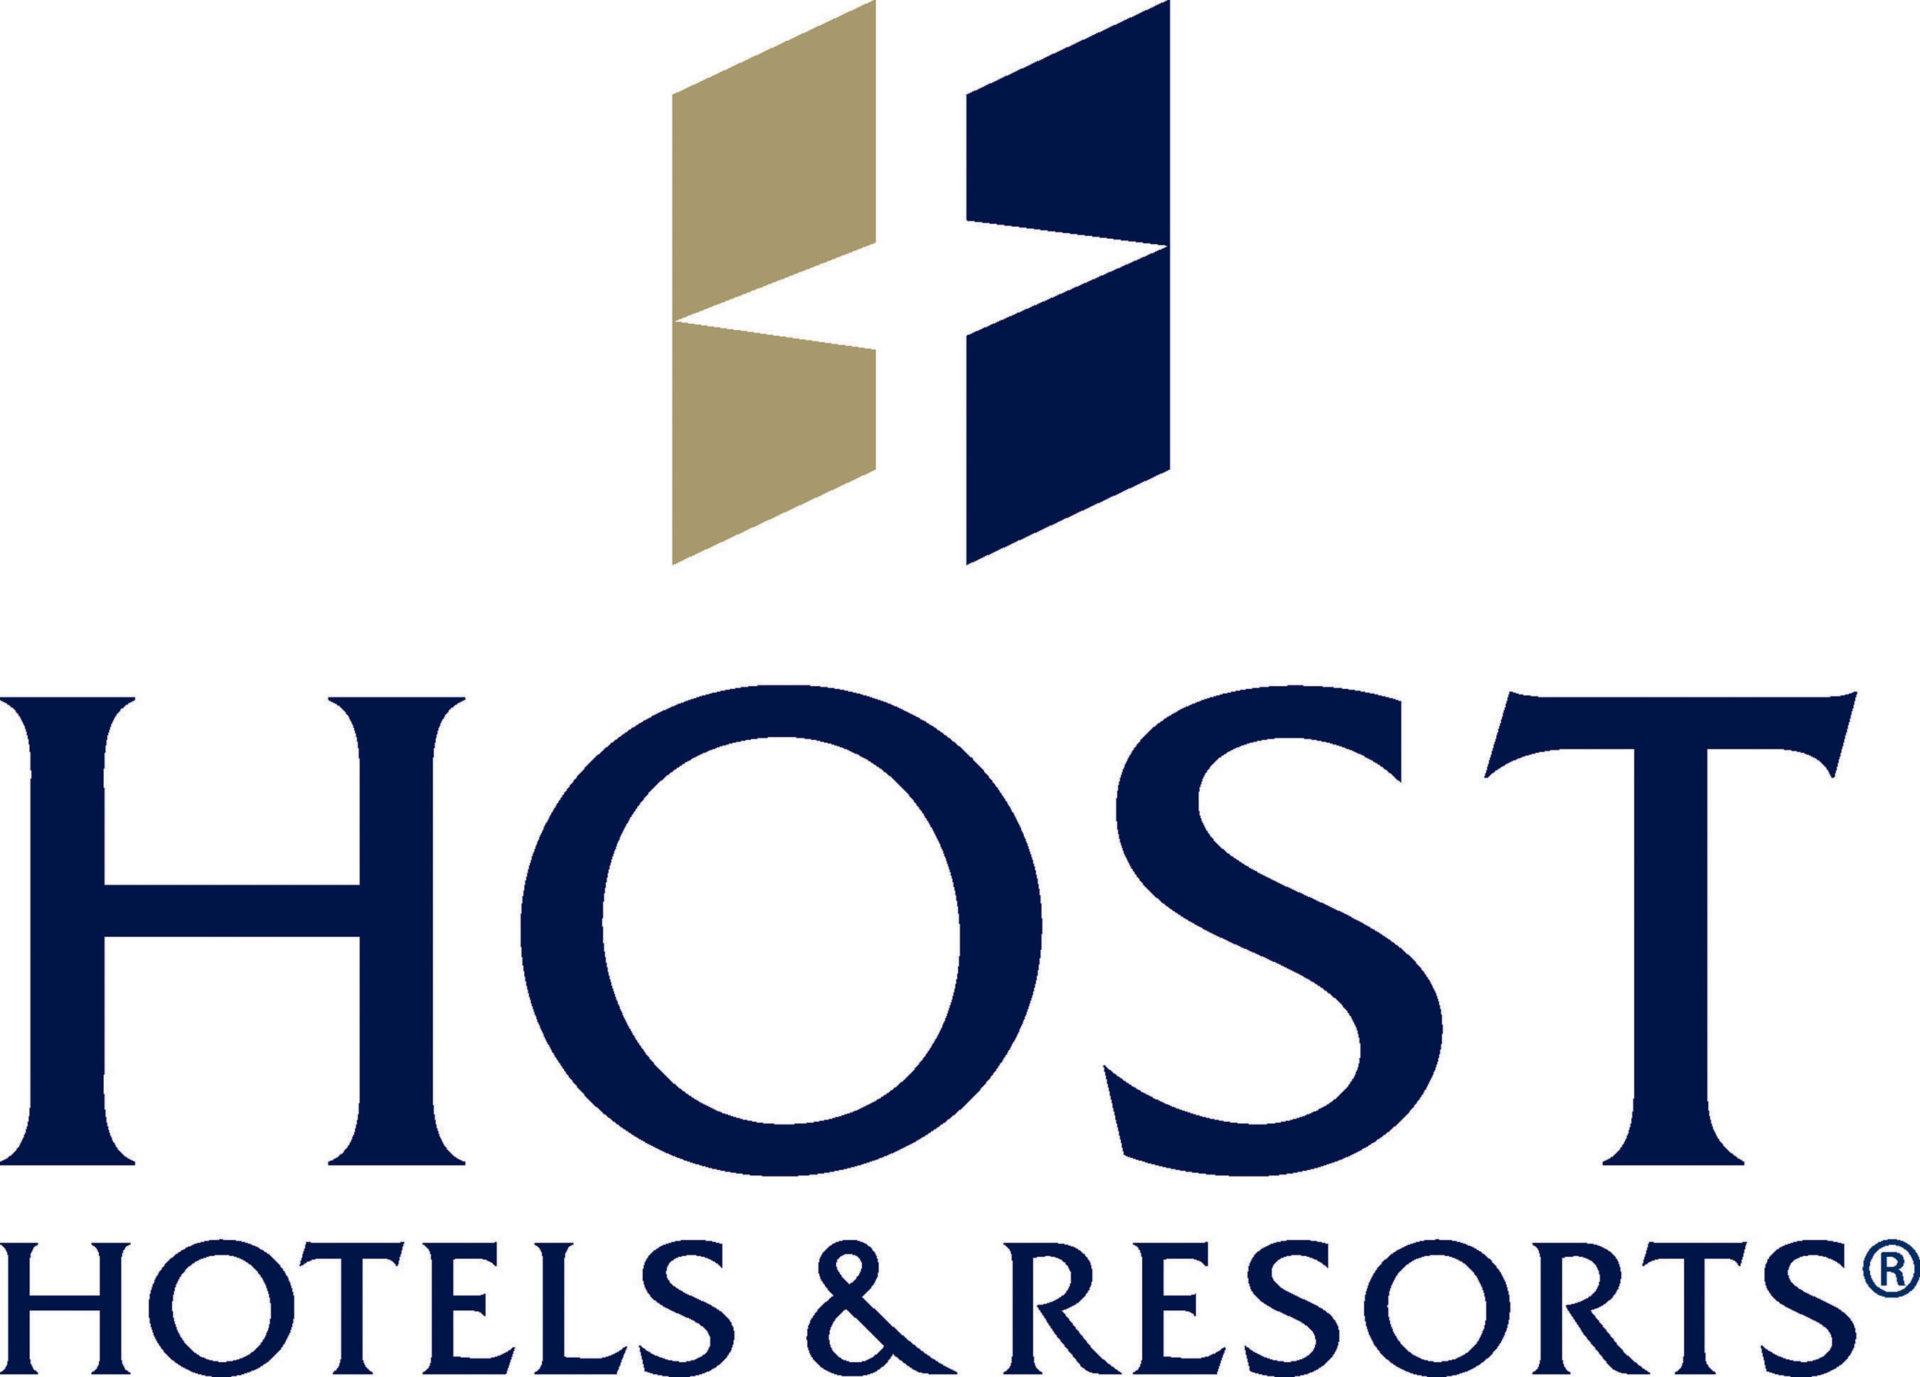 Host Hotels and Resorts